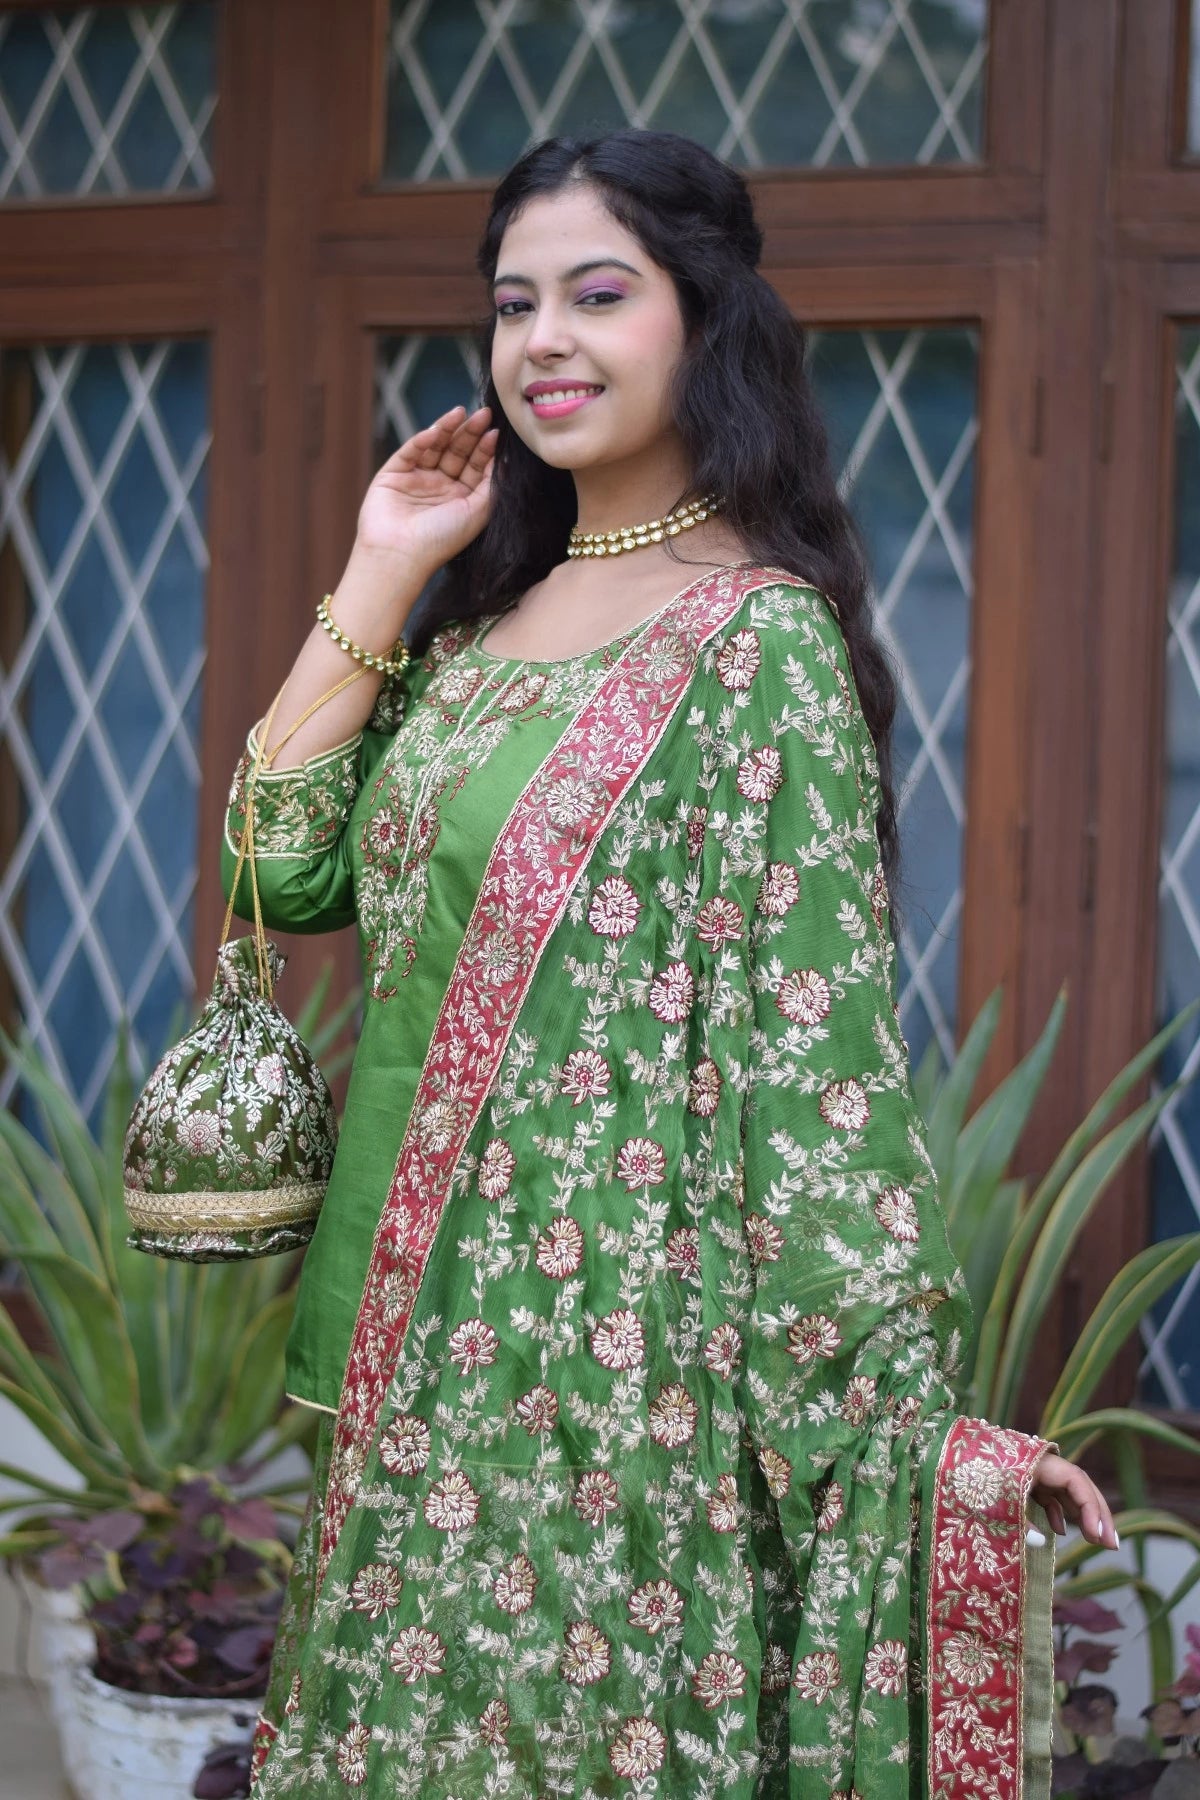 A stunning Indian bride in a green silk gharara suit.